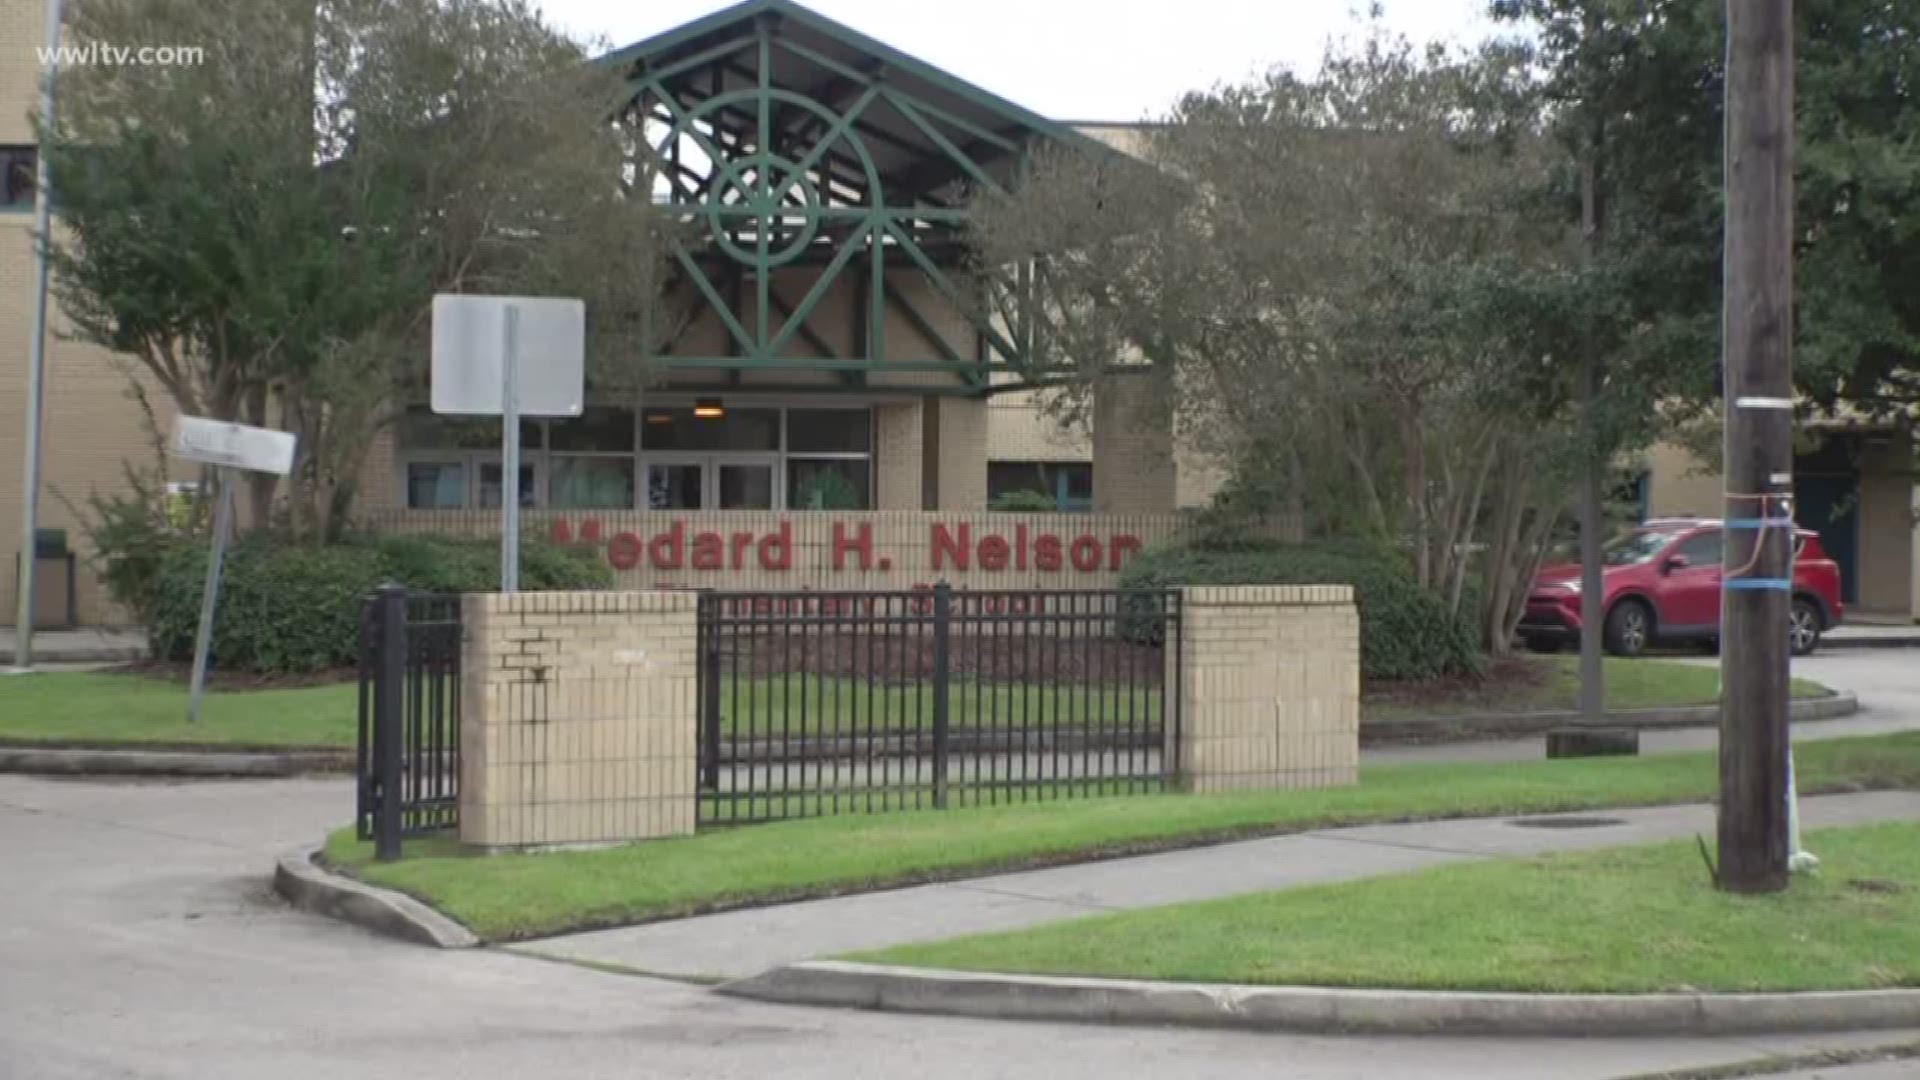 Medard H. Nelson's operator says school's academic record could lead to its doors closing